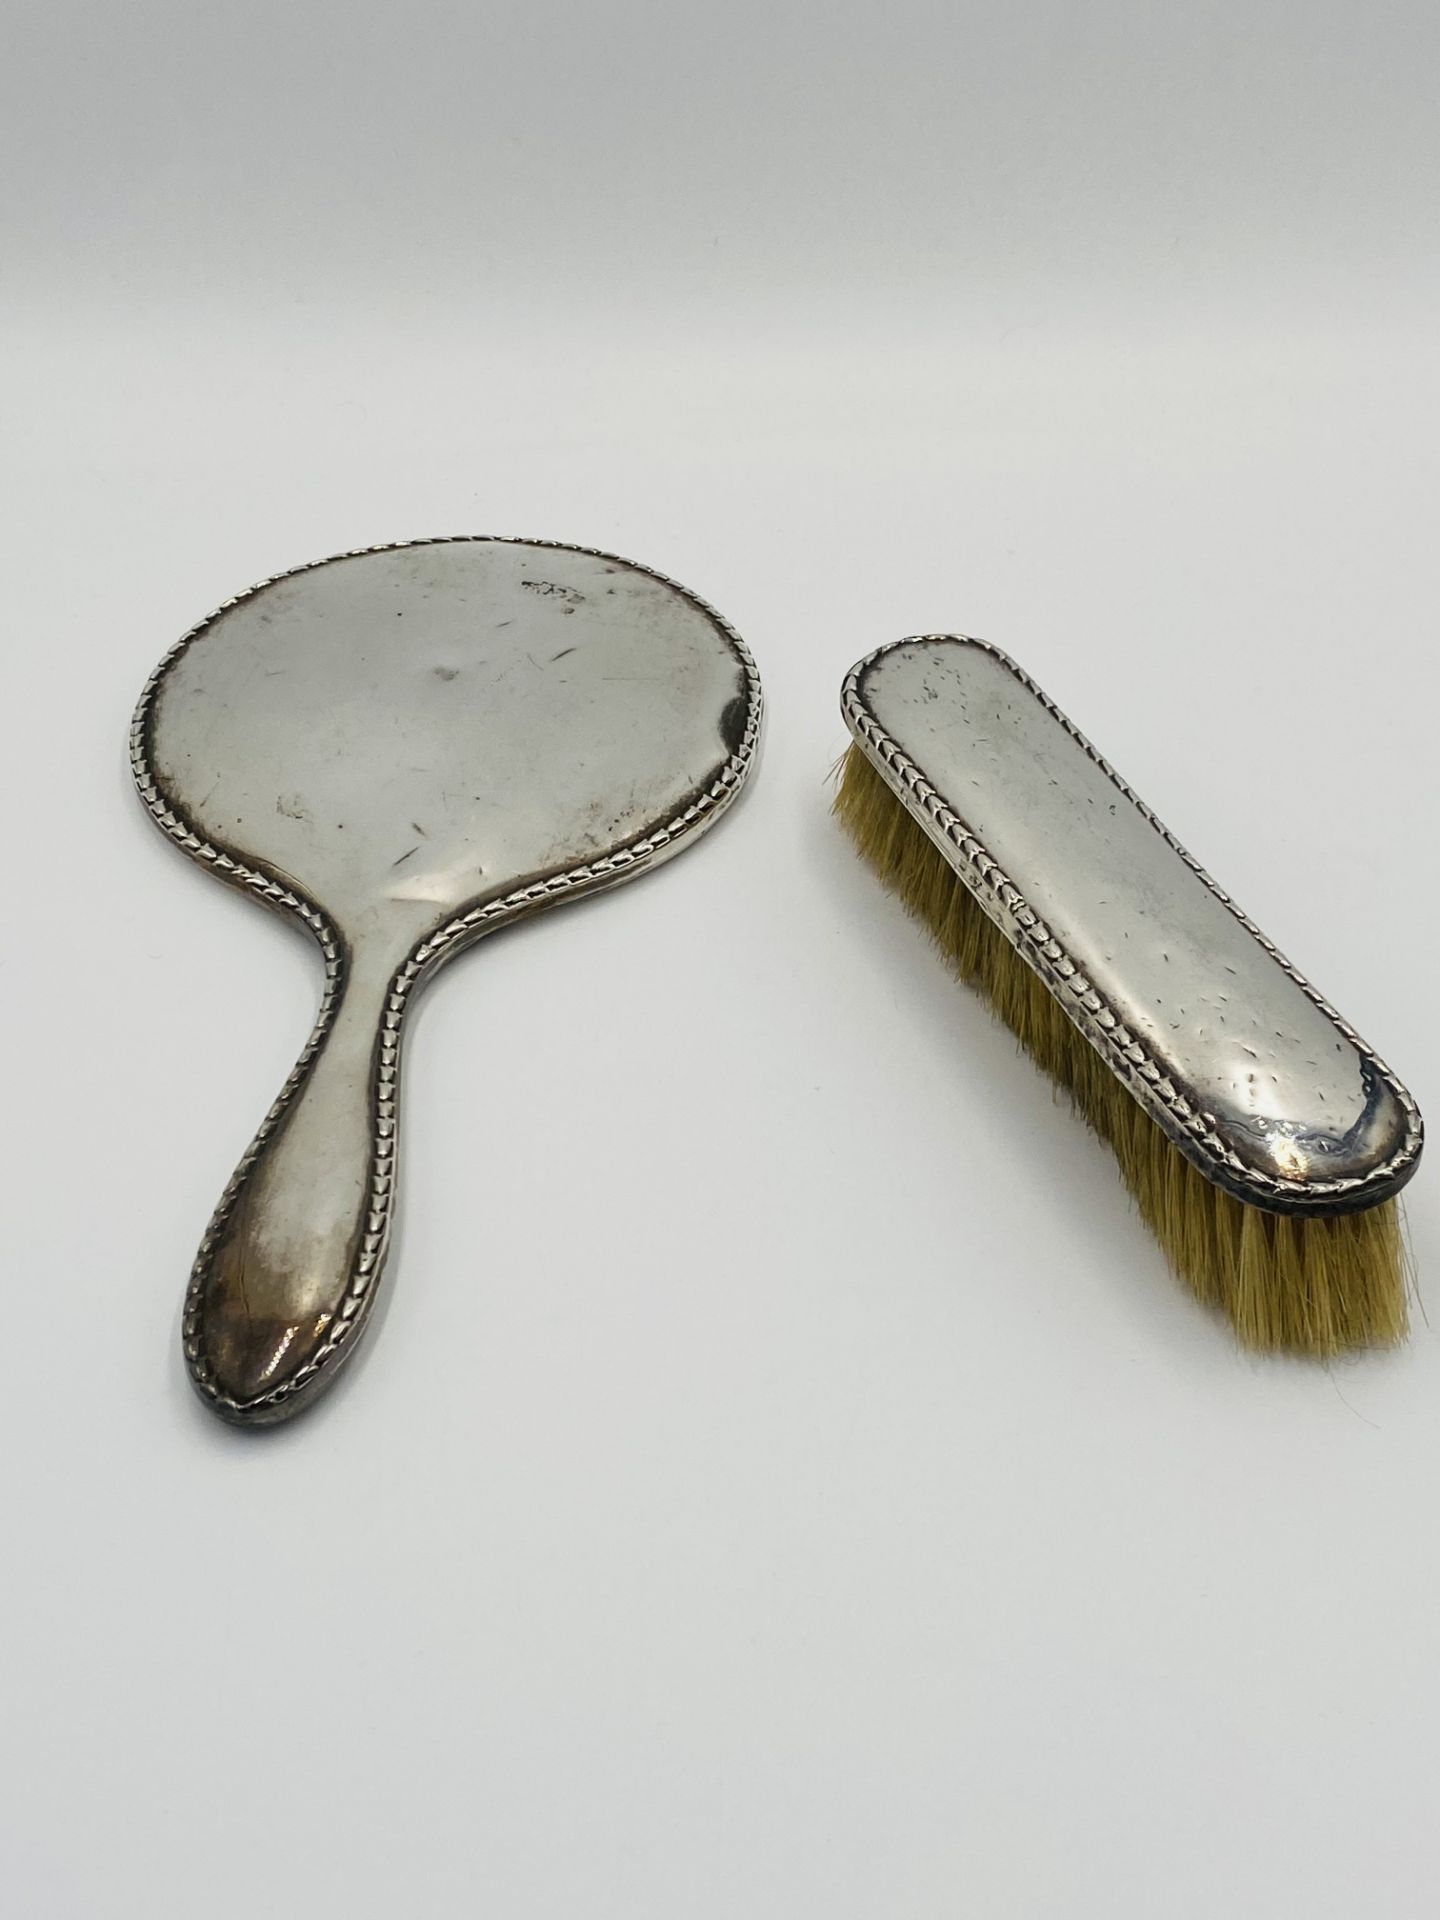 Silver backed dressing table mirror and brush - Image 3 of 6